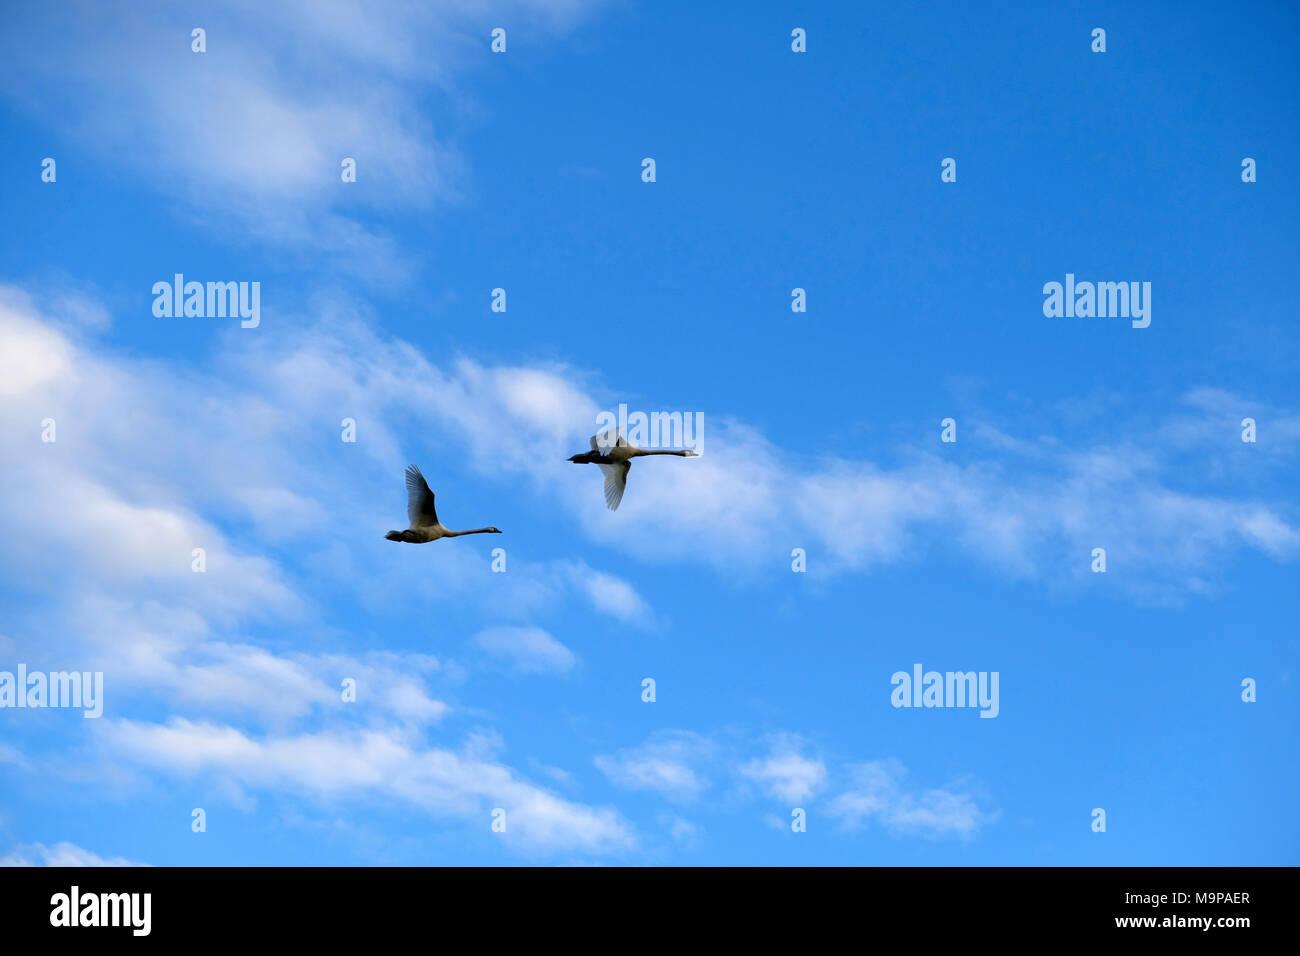 Flying swans in front of the sky with small clouds, Upper Bavaria, Bavaria, Germany Stock Photo